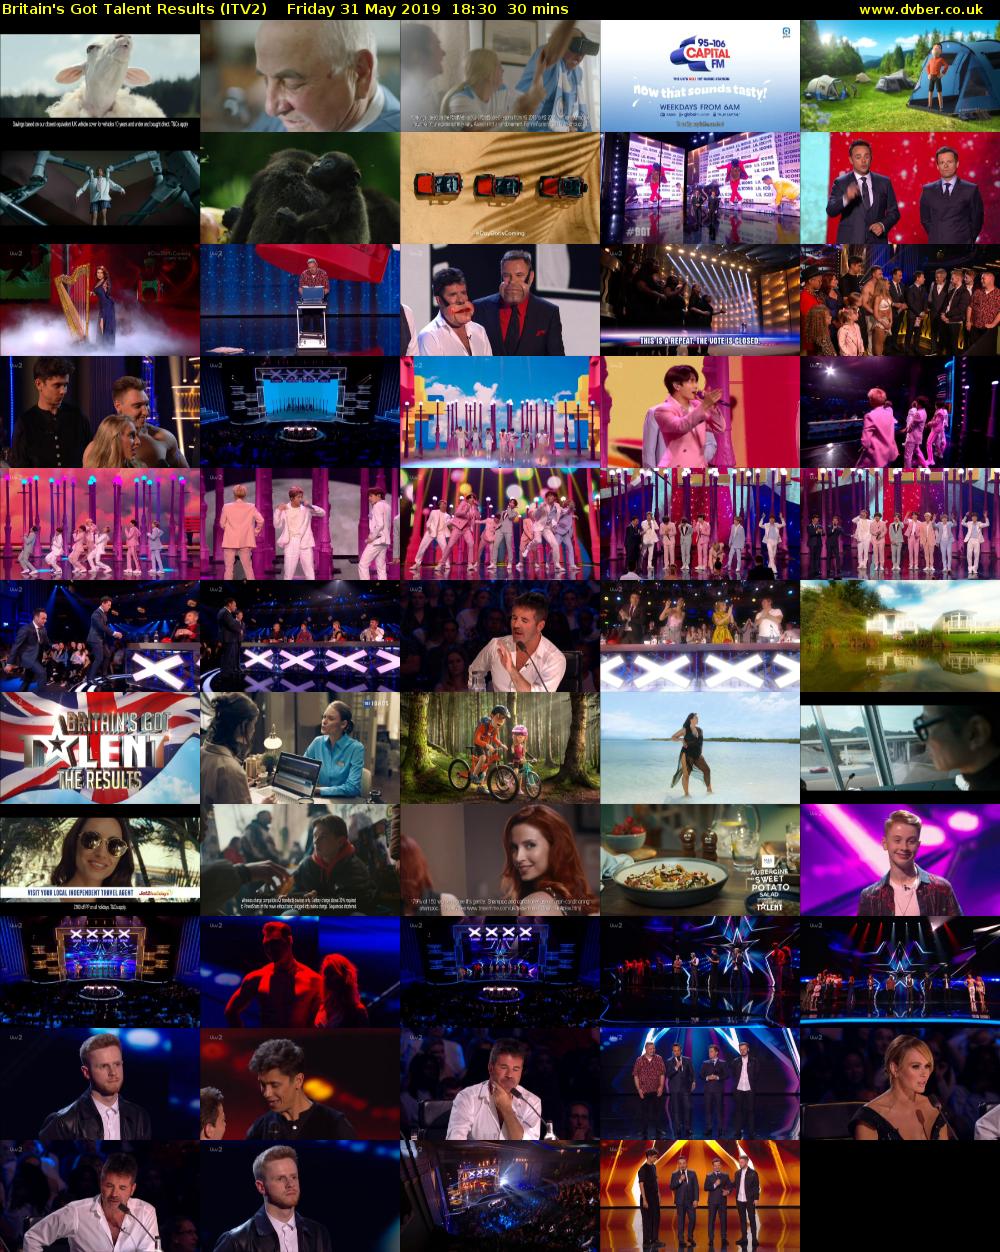 Britain's Got Talent Results (ITV2) Friday 31 May 2019 18:30 - 19:00